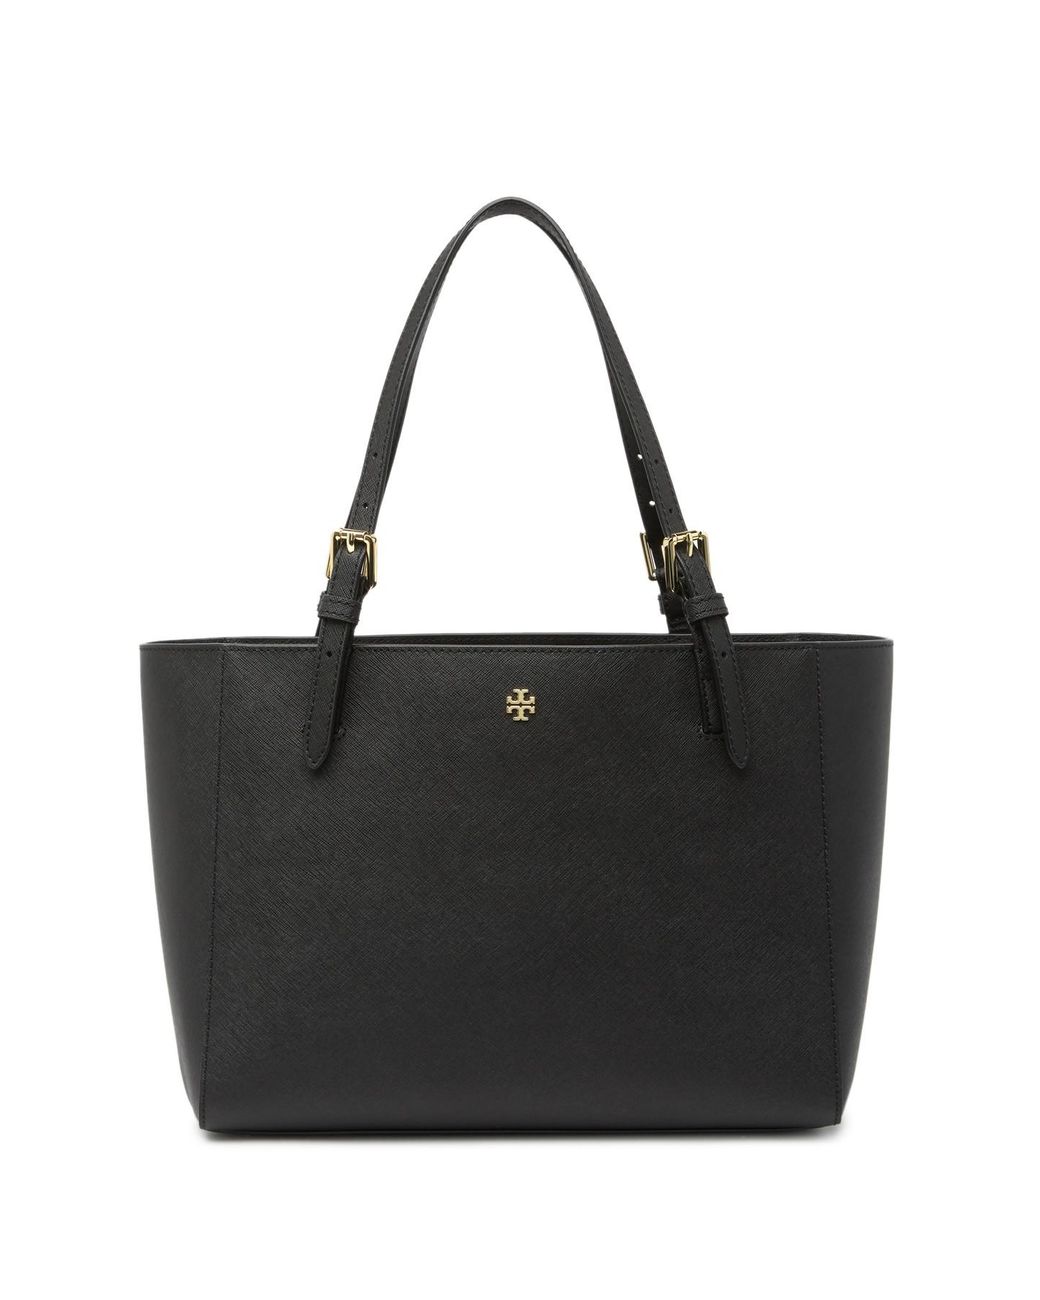 Tory Burch Emerson Buckle Large Shoulder Leather Tote Black Used